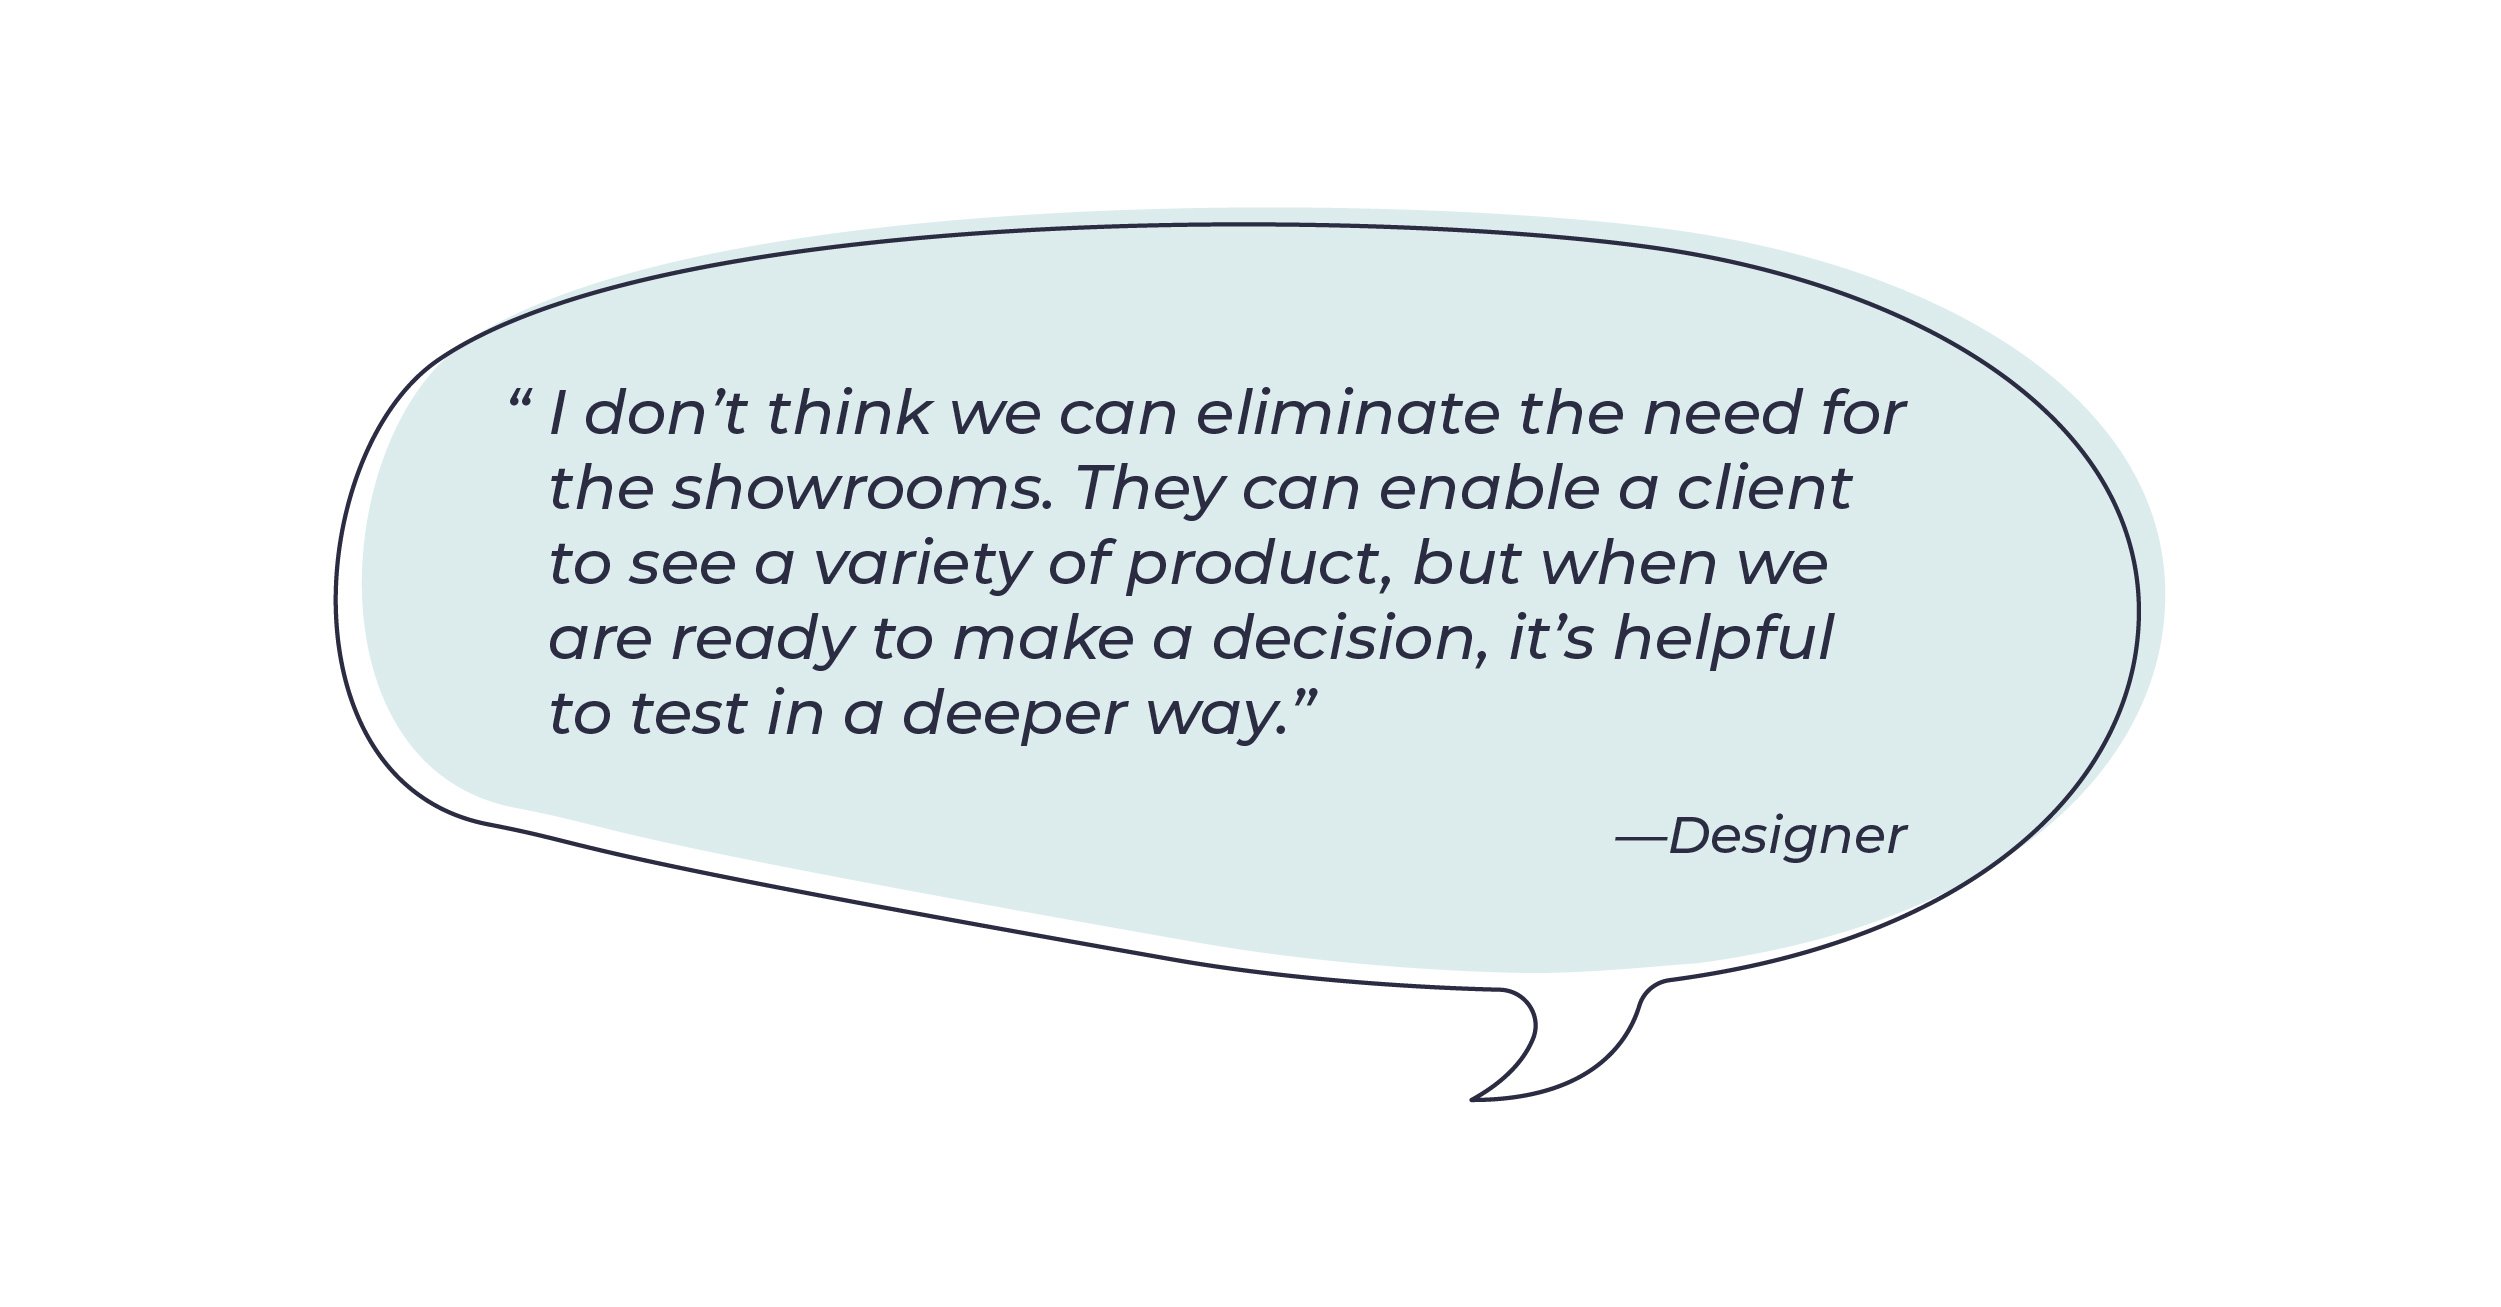 Quote graphic about why designers think showrooms are important to enable clients to see a variety of products and make decisions